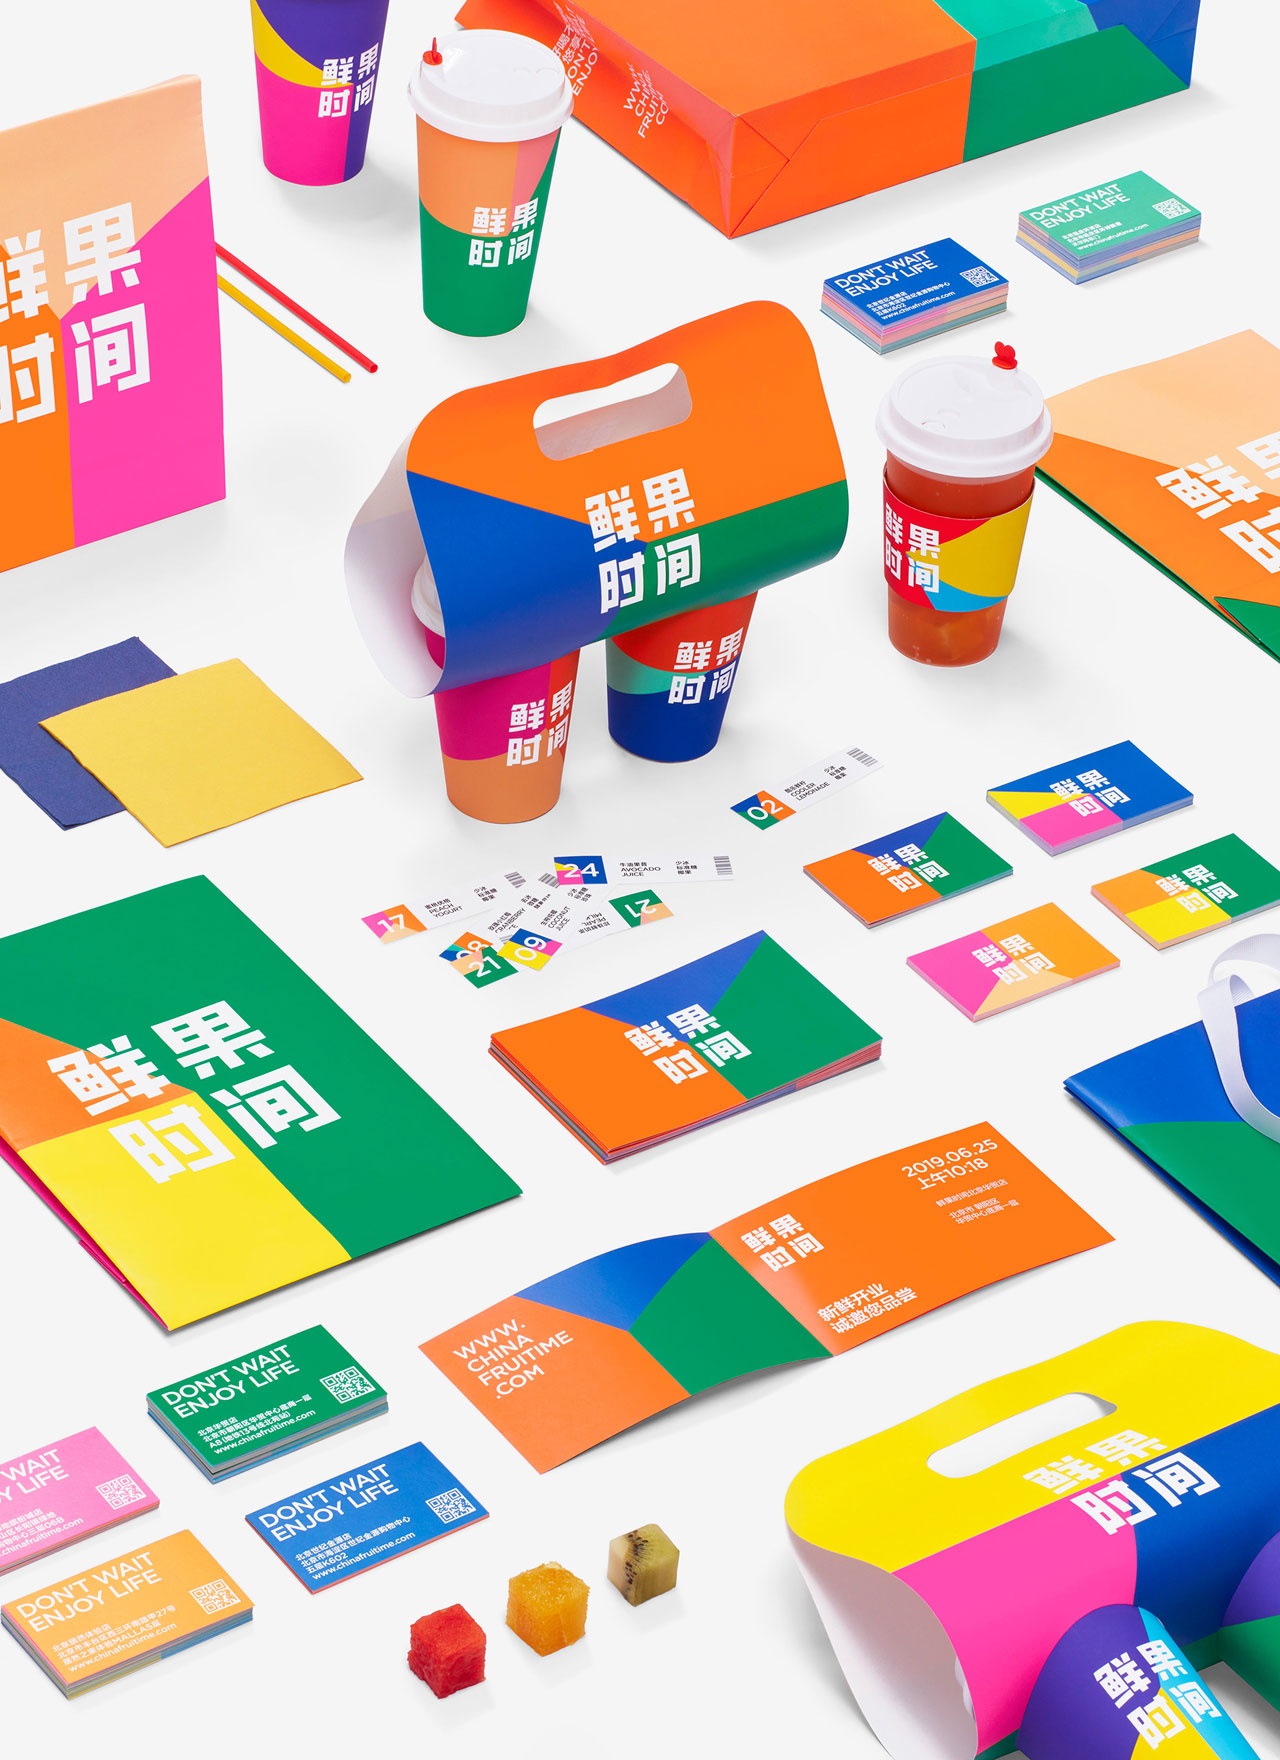 Graphic design, branding, and packaging by Nod Young for It’s Time To.